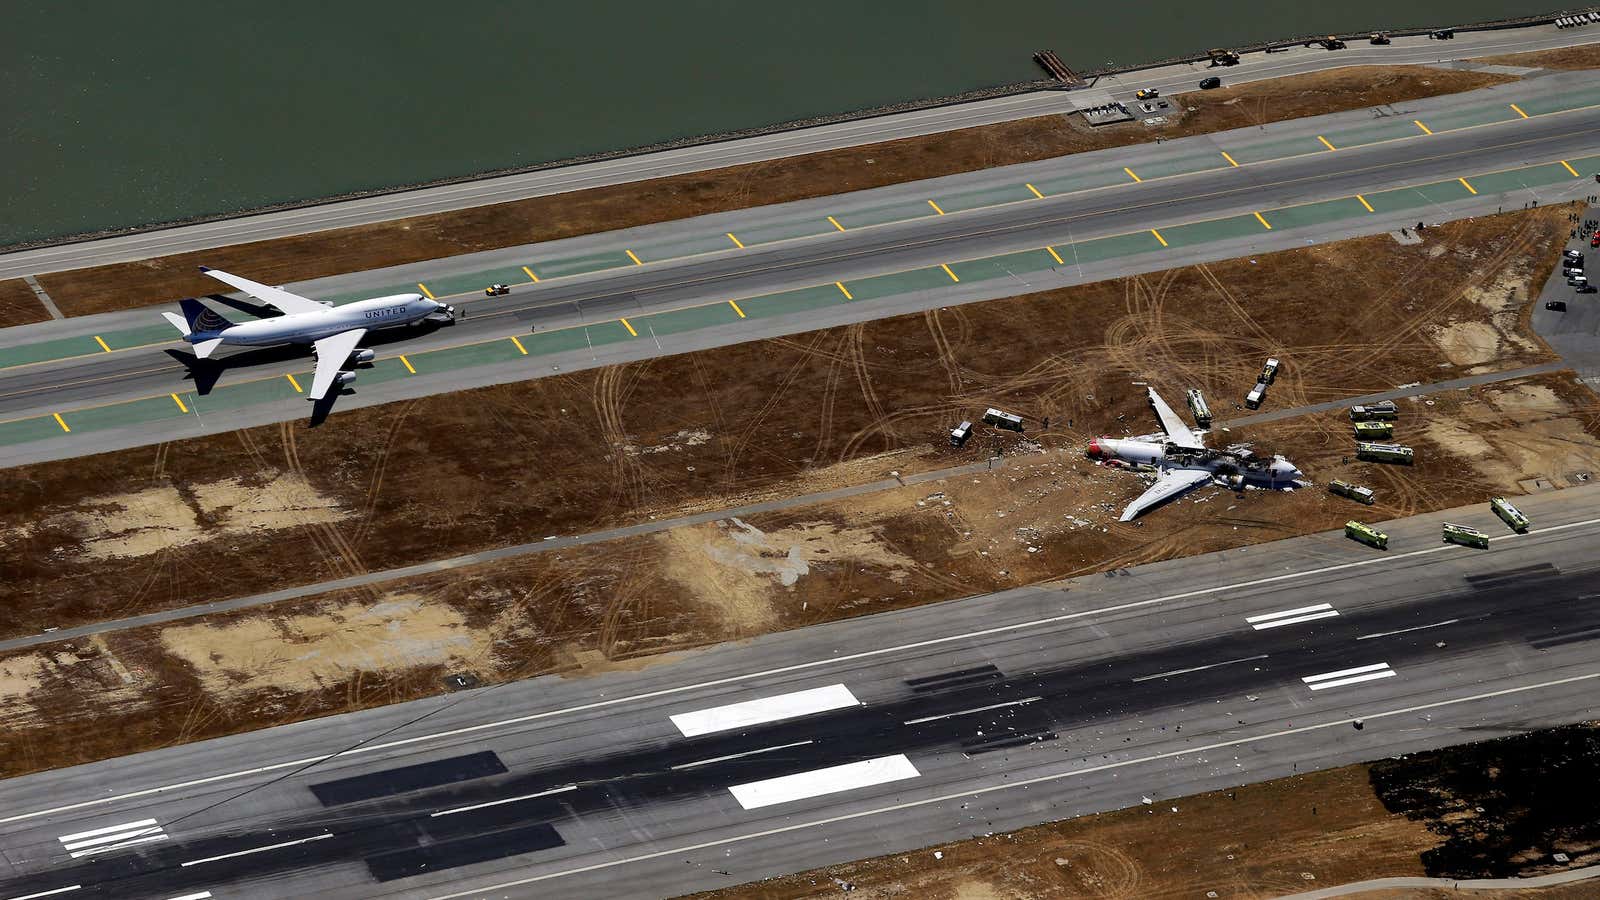 For a while, passengers at SFO will have a less-than-reassuring sight as they taxi down the runway.